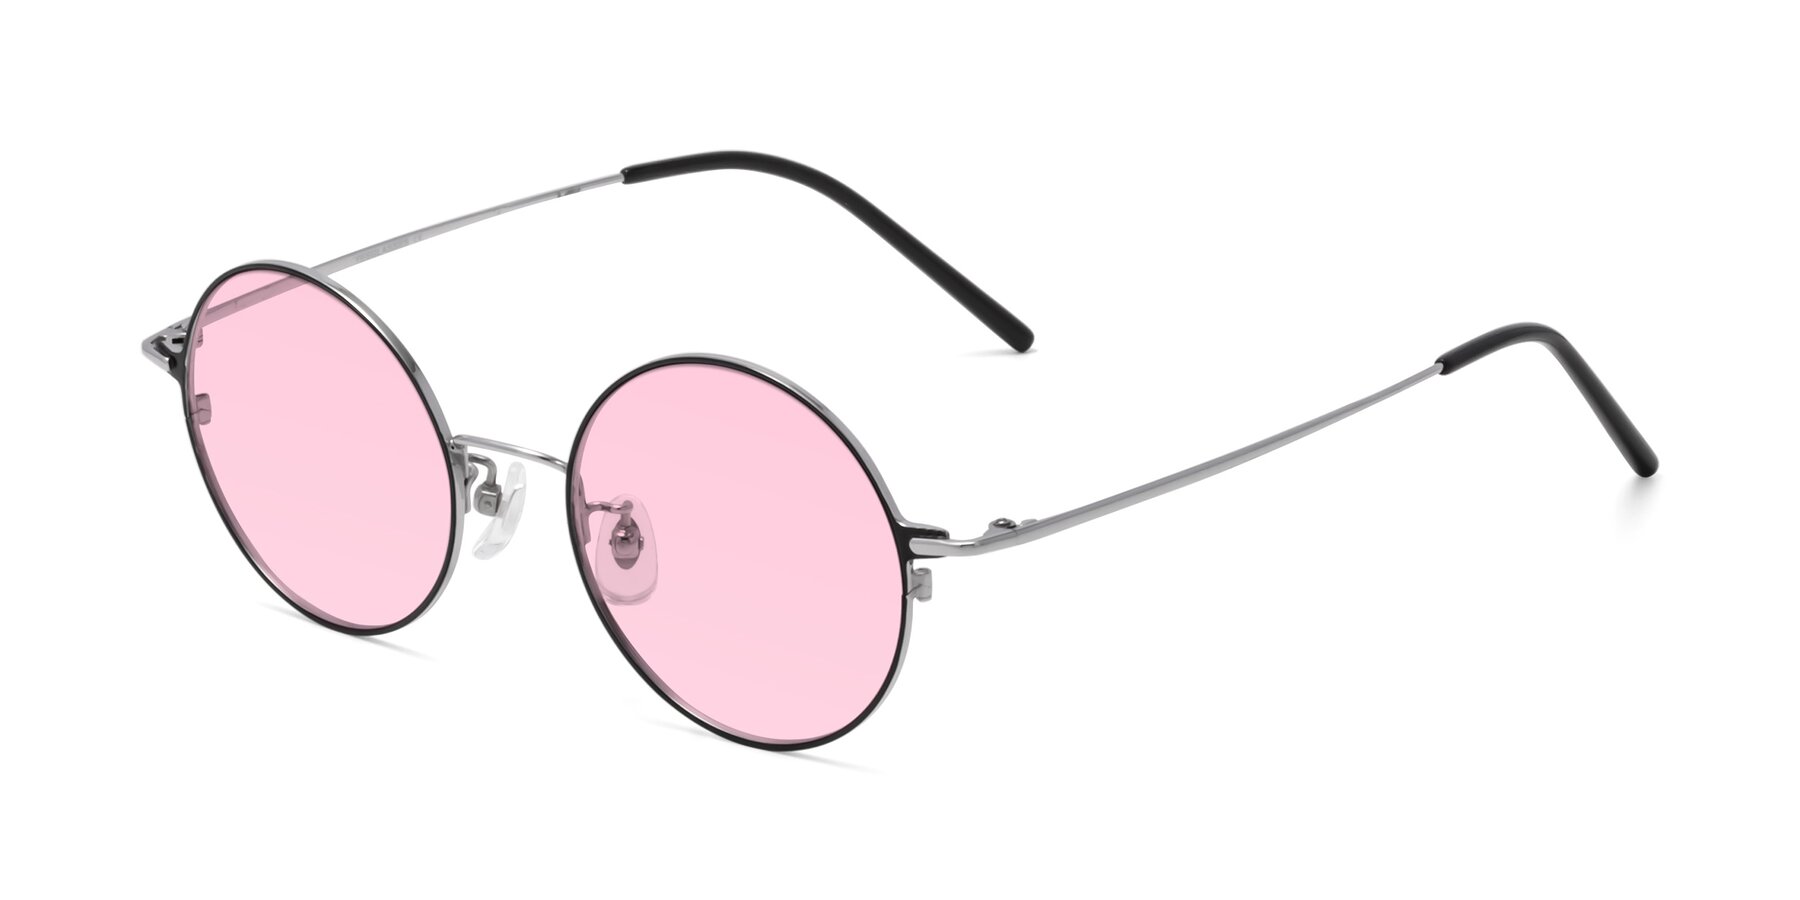 Angle of 18009 in Black-Silver with Light Pink Tinted Lenses